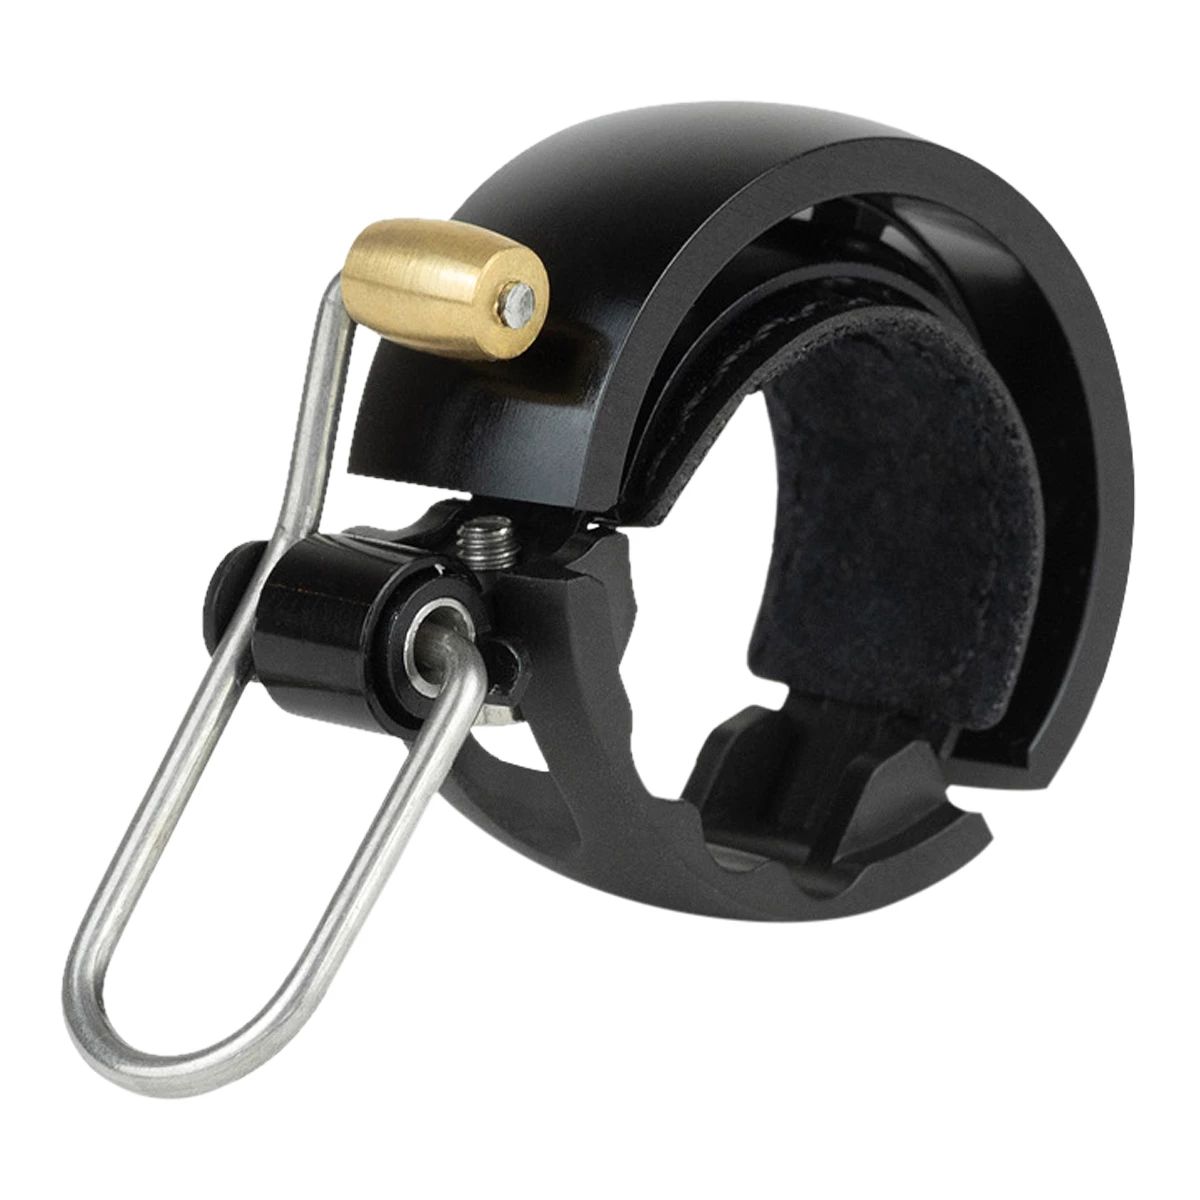 Image of Knog OI Luxe Bike Bell